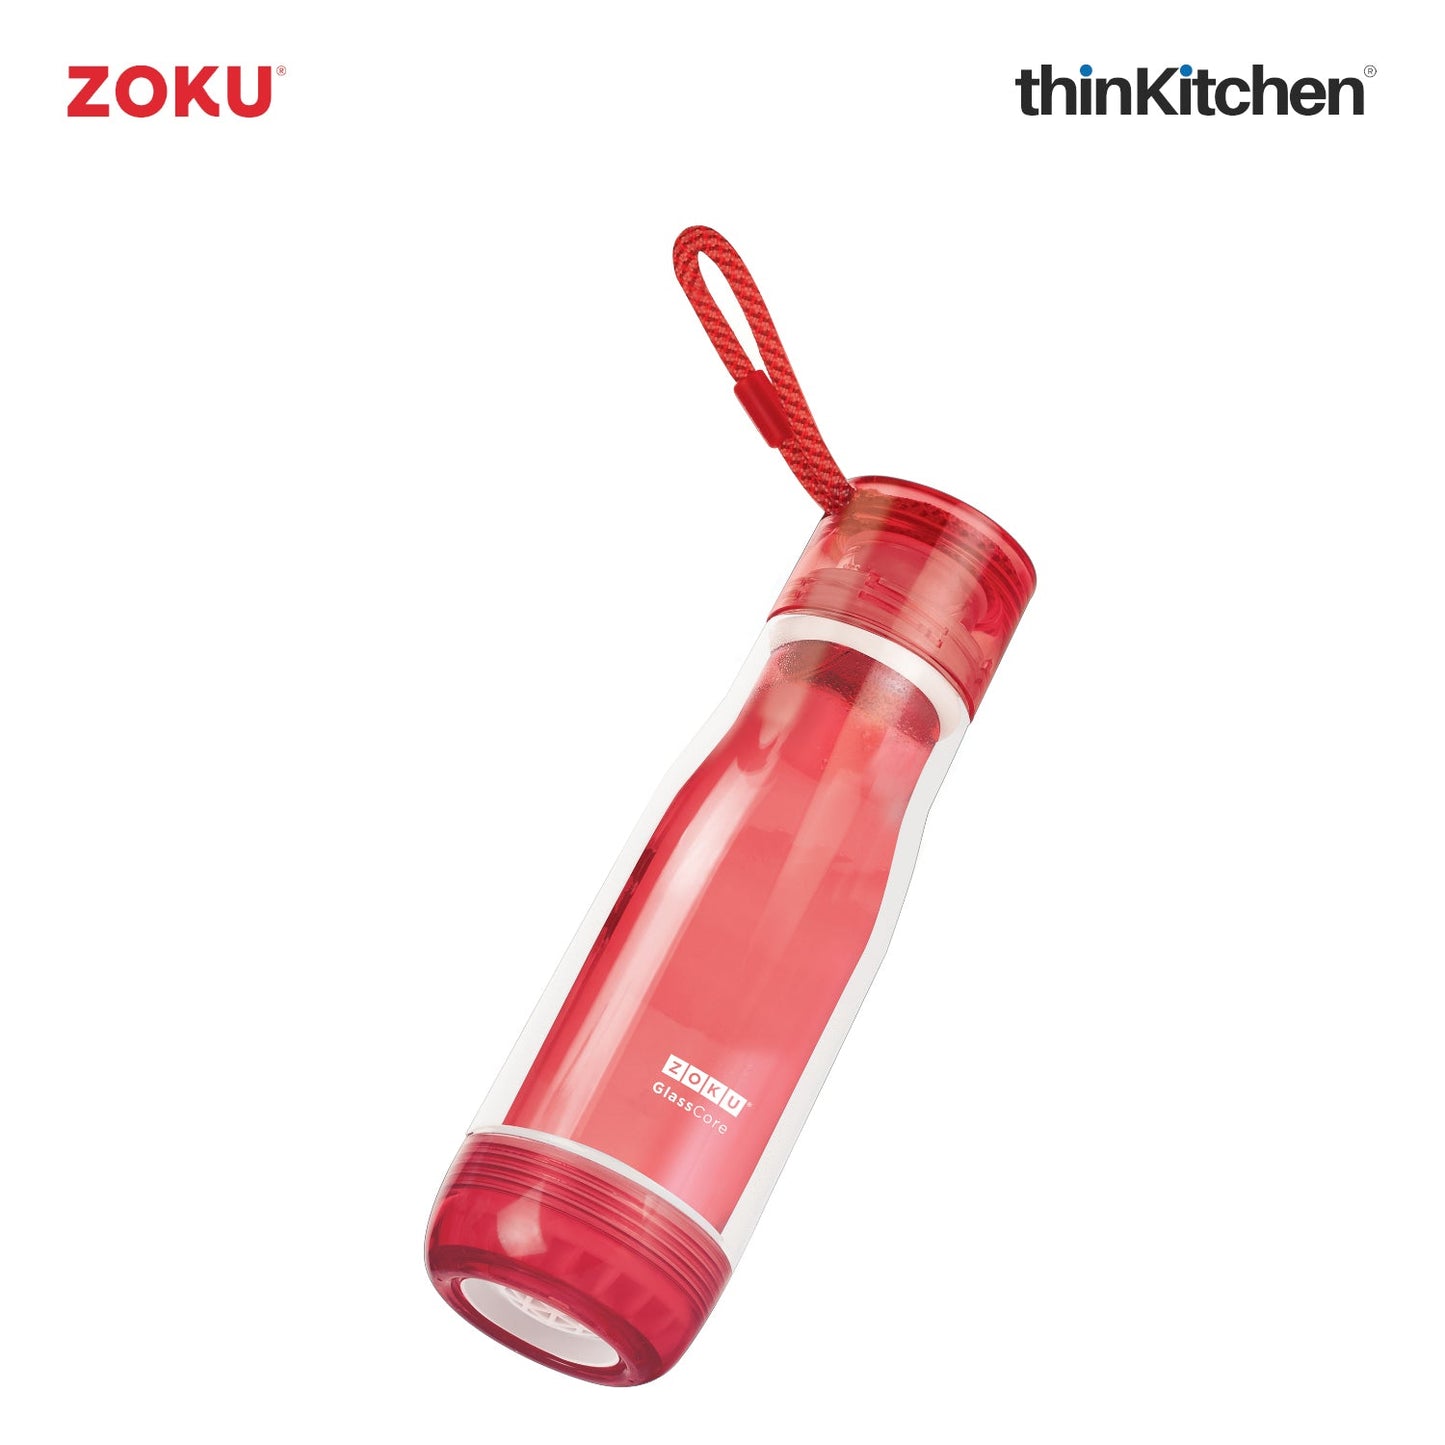 thinKitchen™ Zoku Red Everyday Outer Core Bottle, 475ml